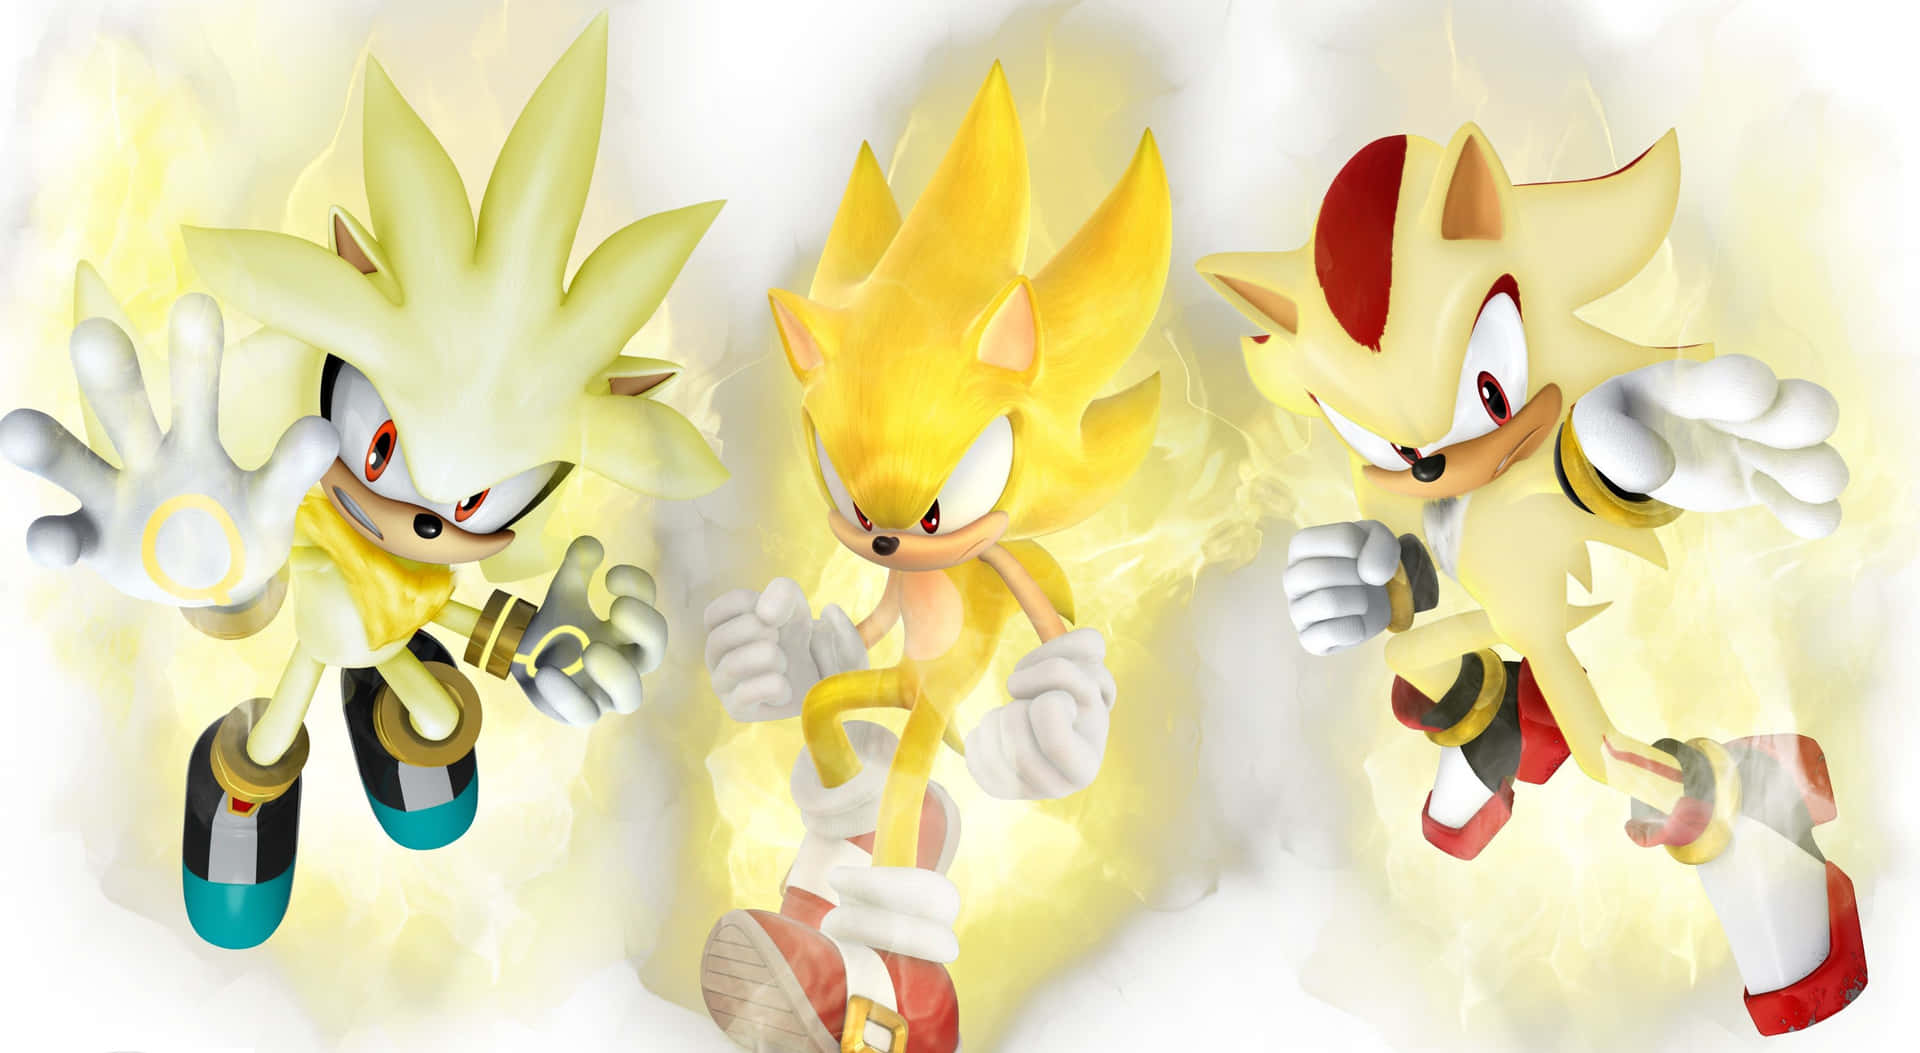 super sonic and super shadow and super silver wallpaper